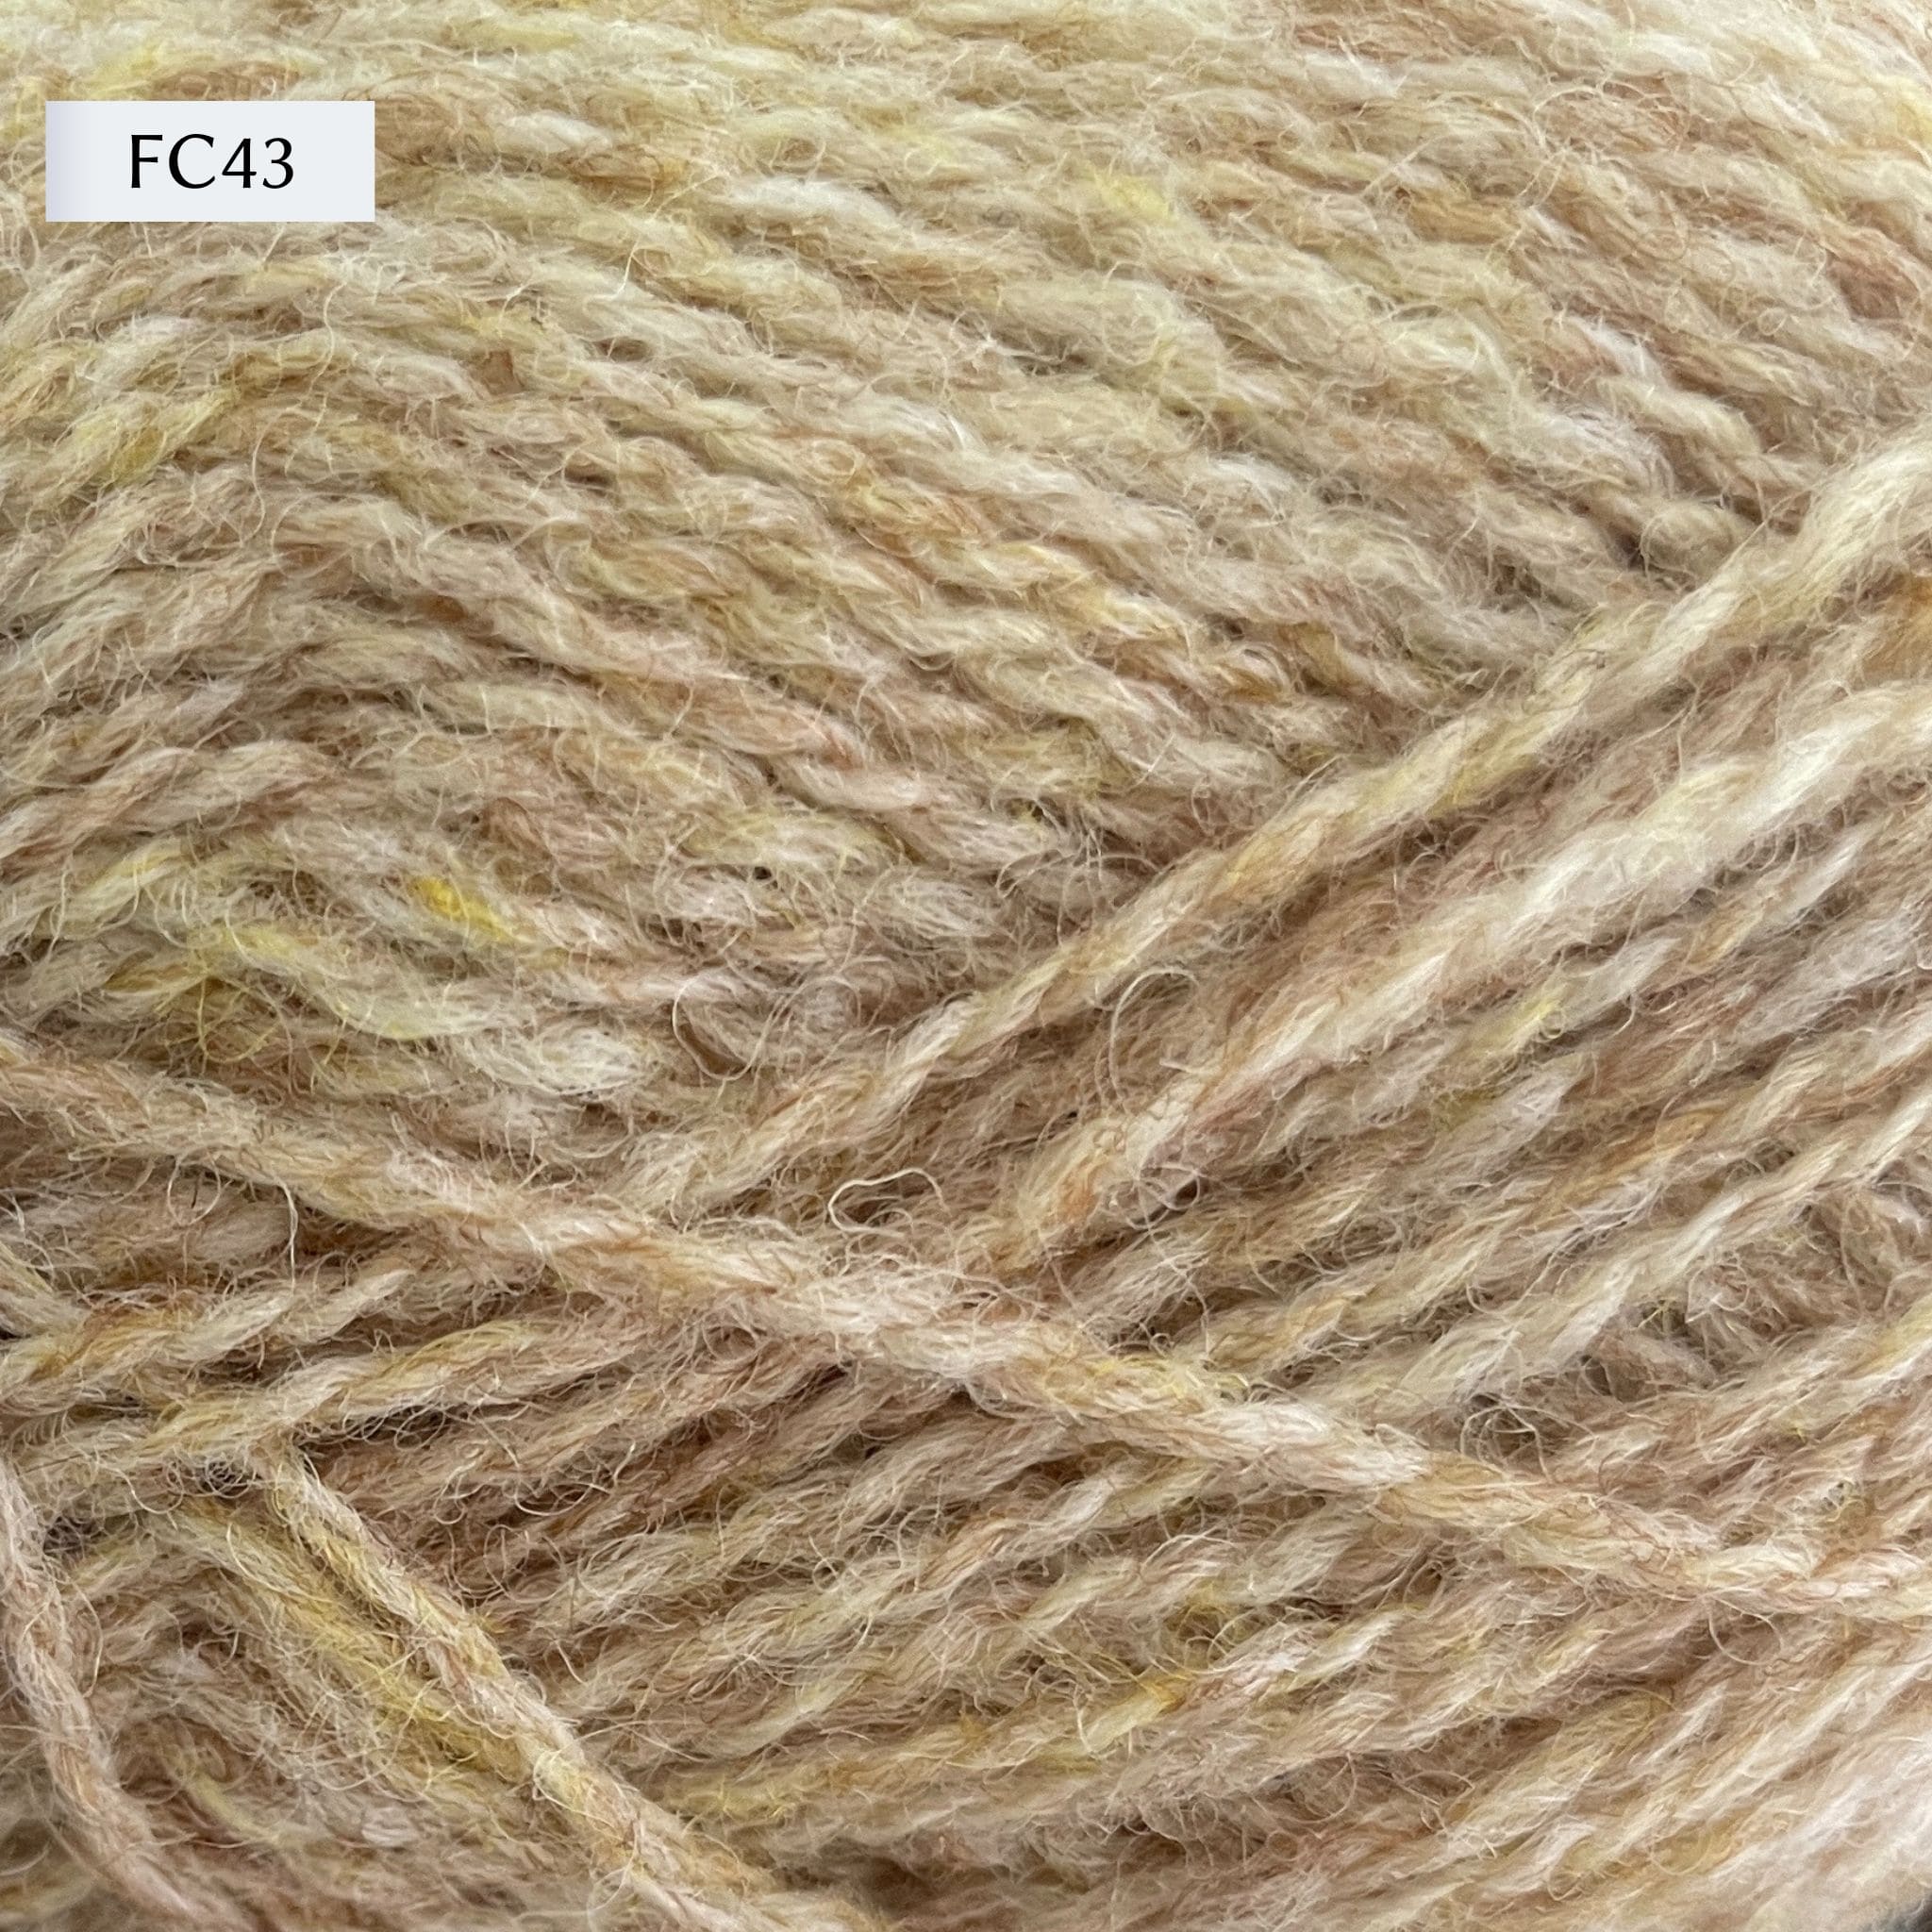 Jamieson & Smith 2ply Jumper Weight, light fingering weight yarn, in color FC43, a light heathered cream-yellow